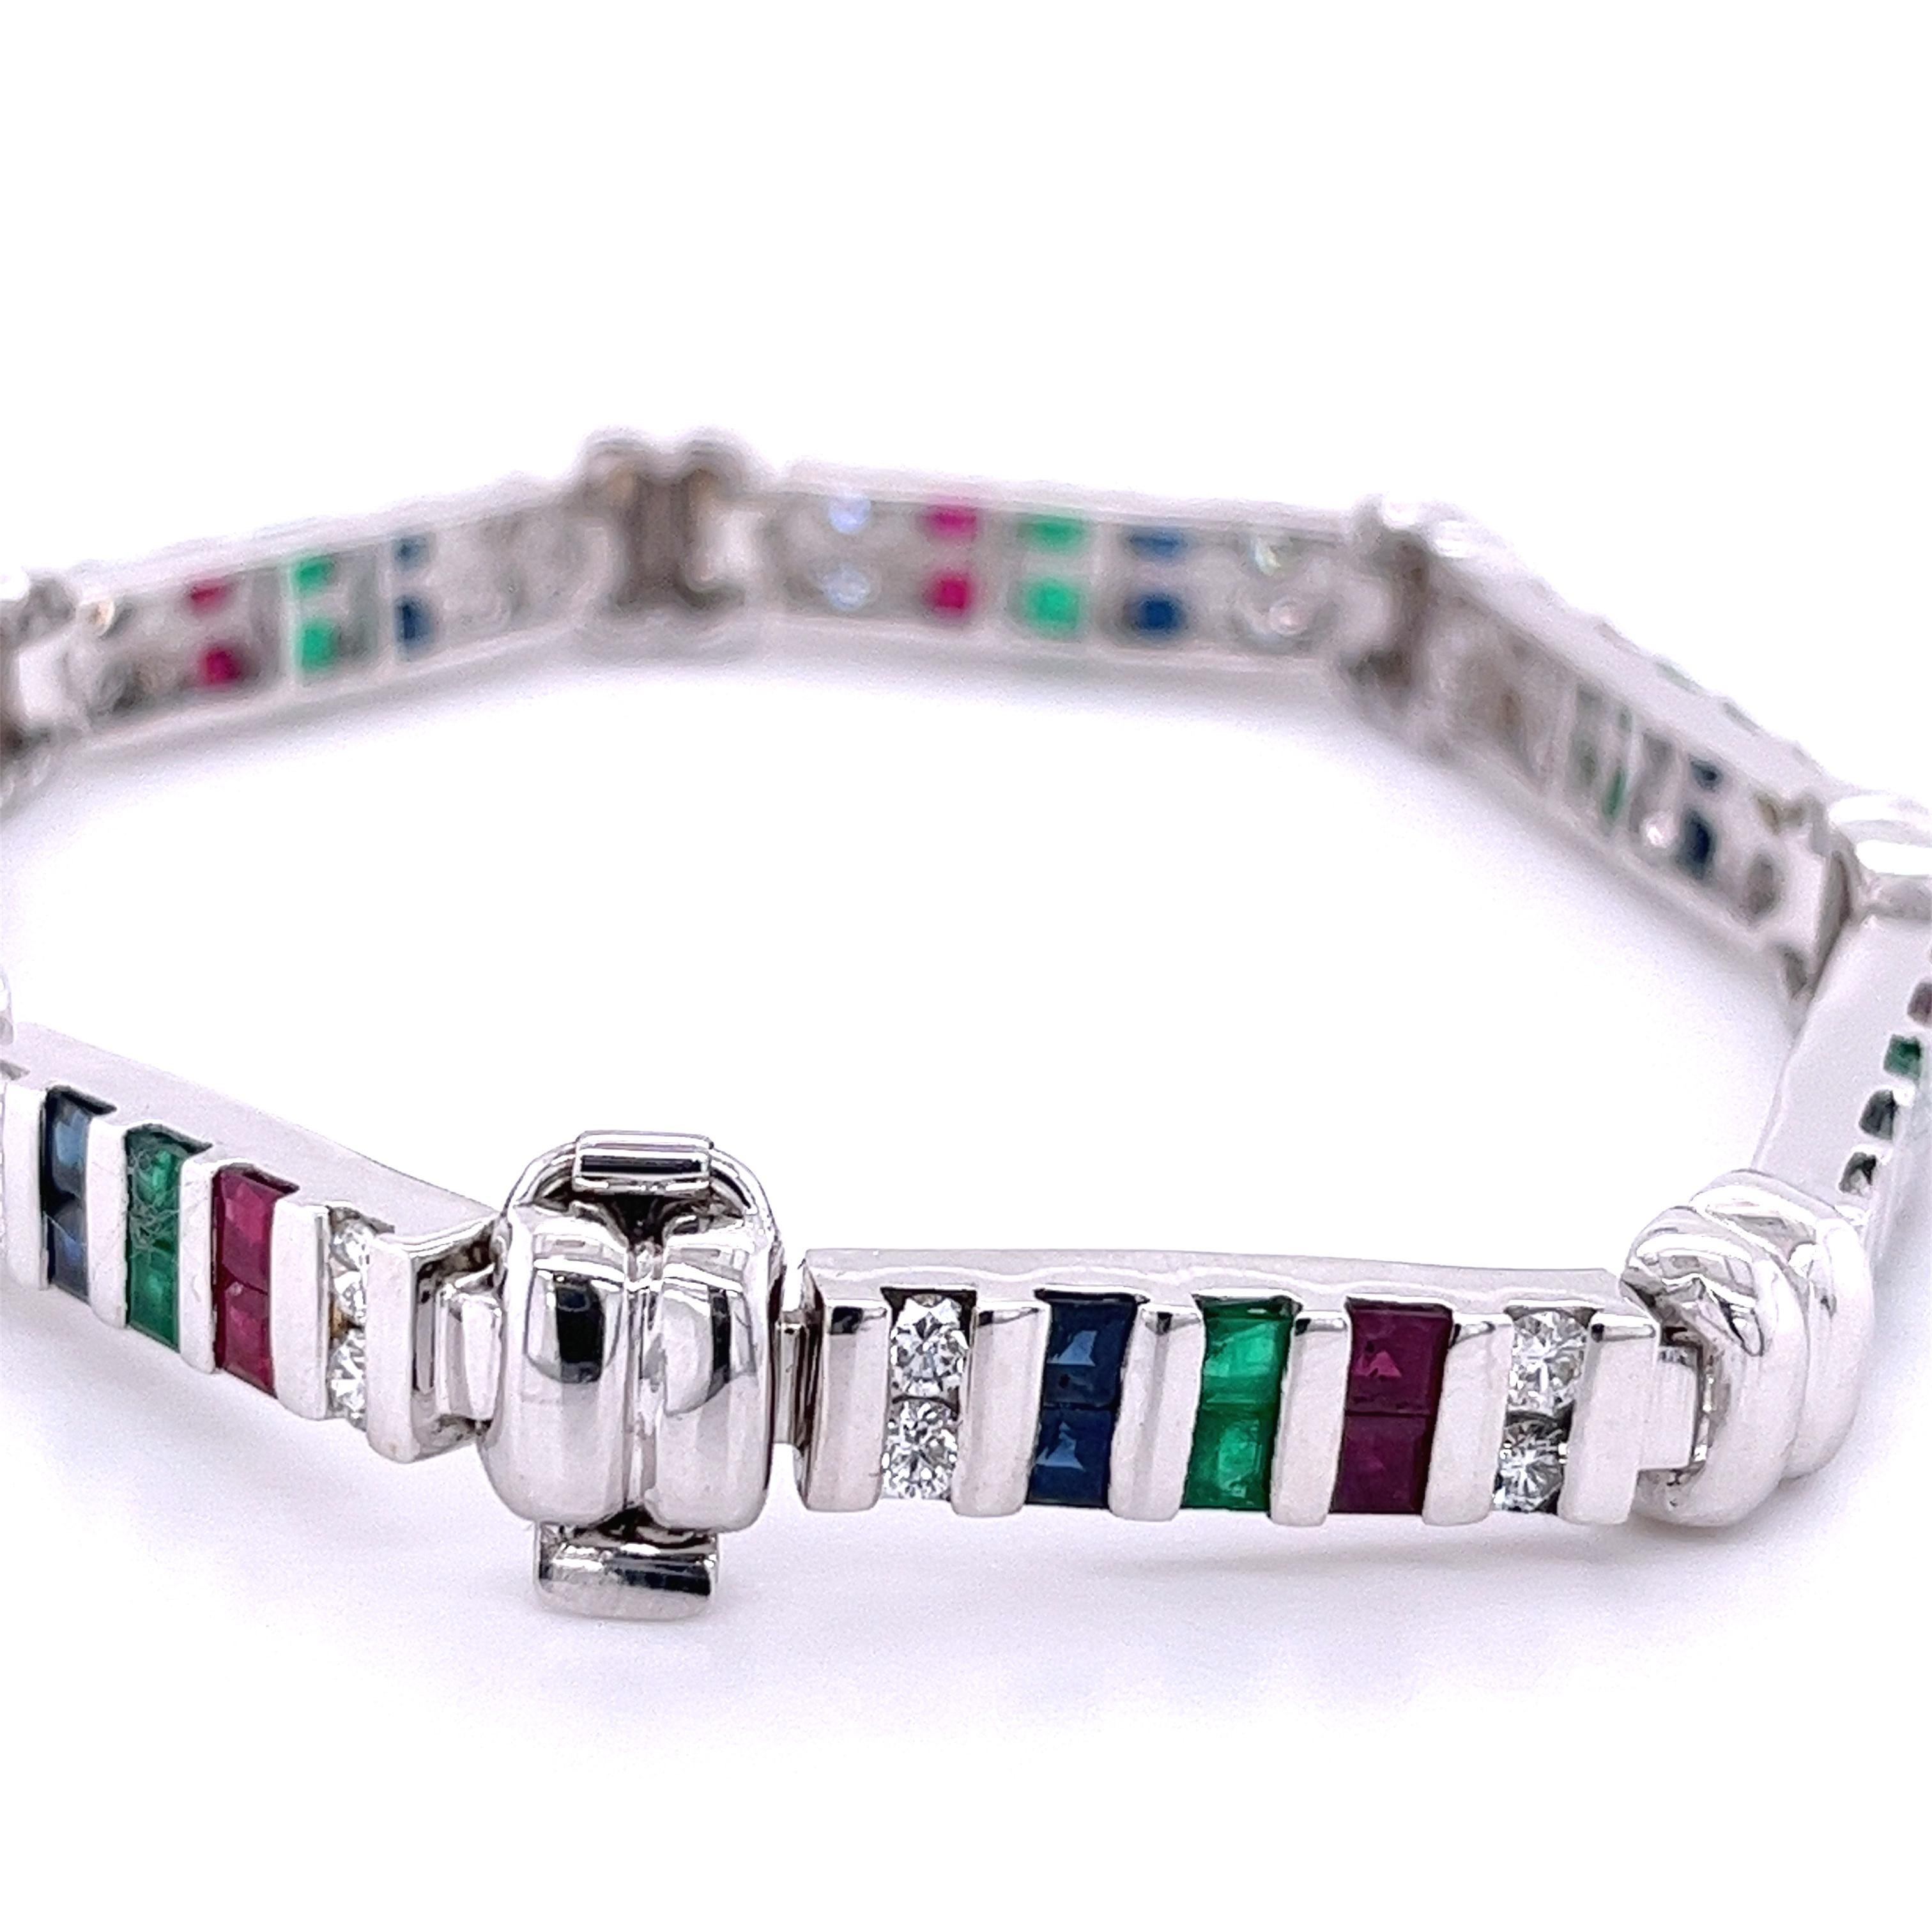 Set in 18K White Gold and accented by roughly 12 total carats of matching Diamonds, Emeralds, Rubies and Sapphires, this vintage bracelet is a finely-crafted, marvelously-designed jewel.

Details:
✔ Stone(s): Diamond, Emerald, Ruby, Sapphire 
✔